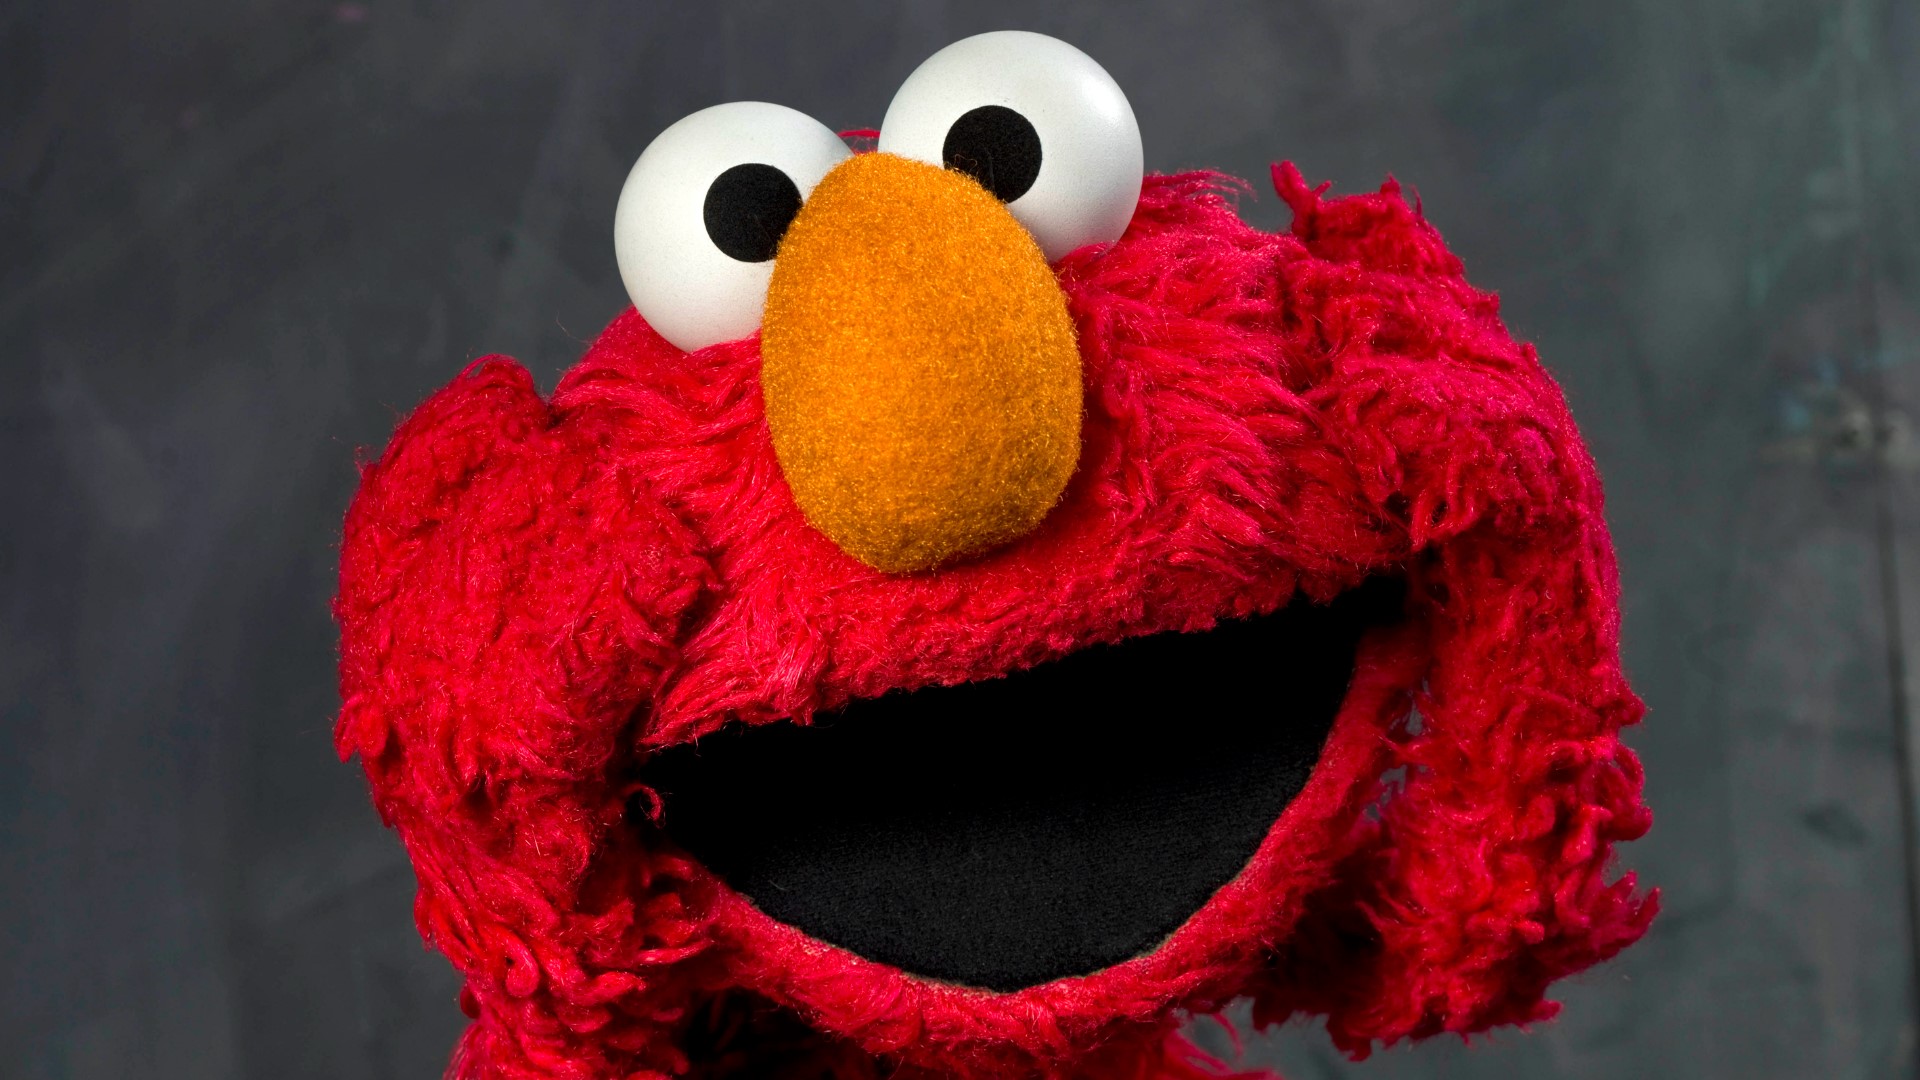 Elmo posted on X to see how everyone was doing, and just about everyone used it as opportunity to unload their feelings.